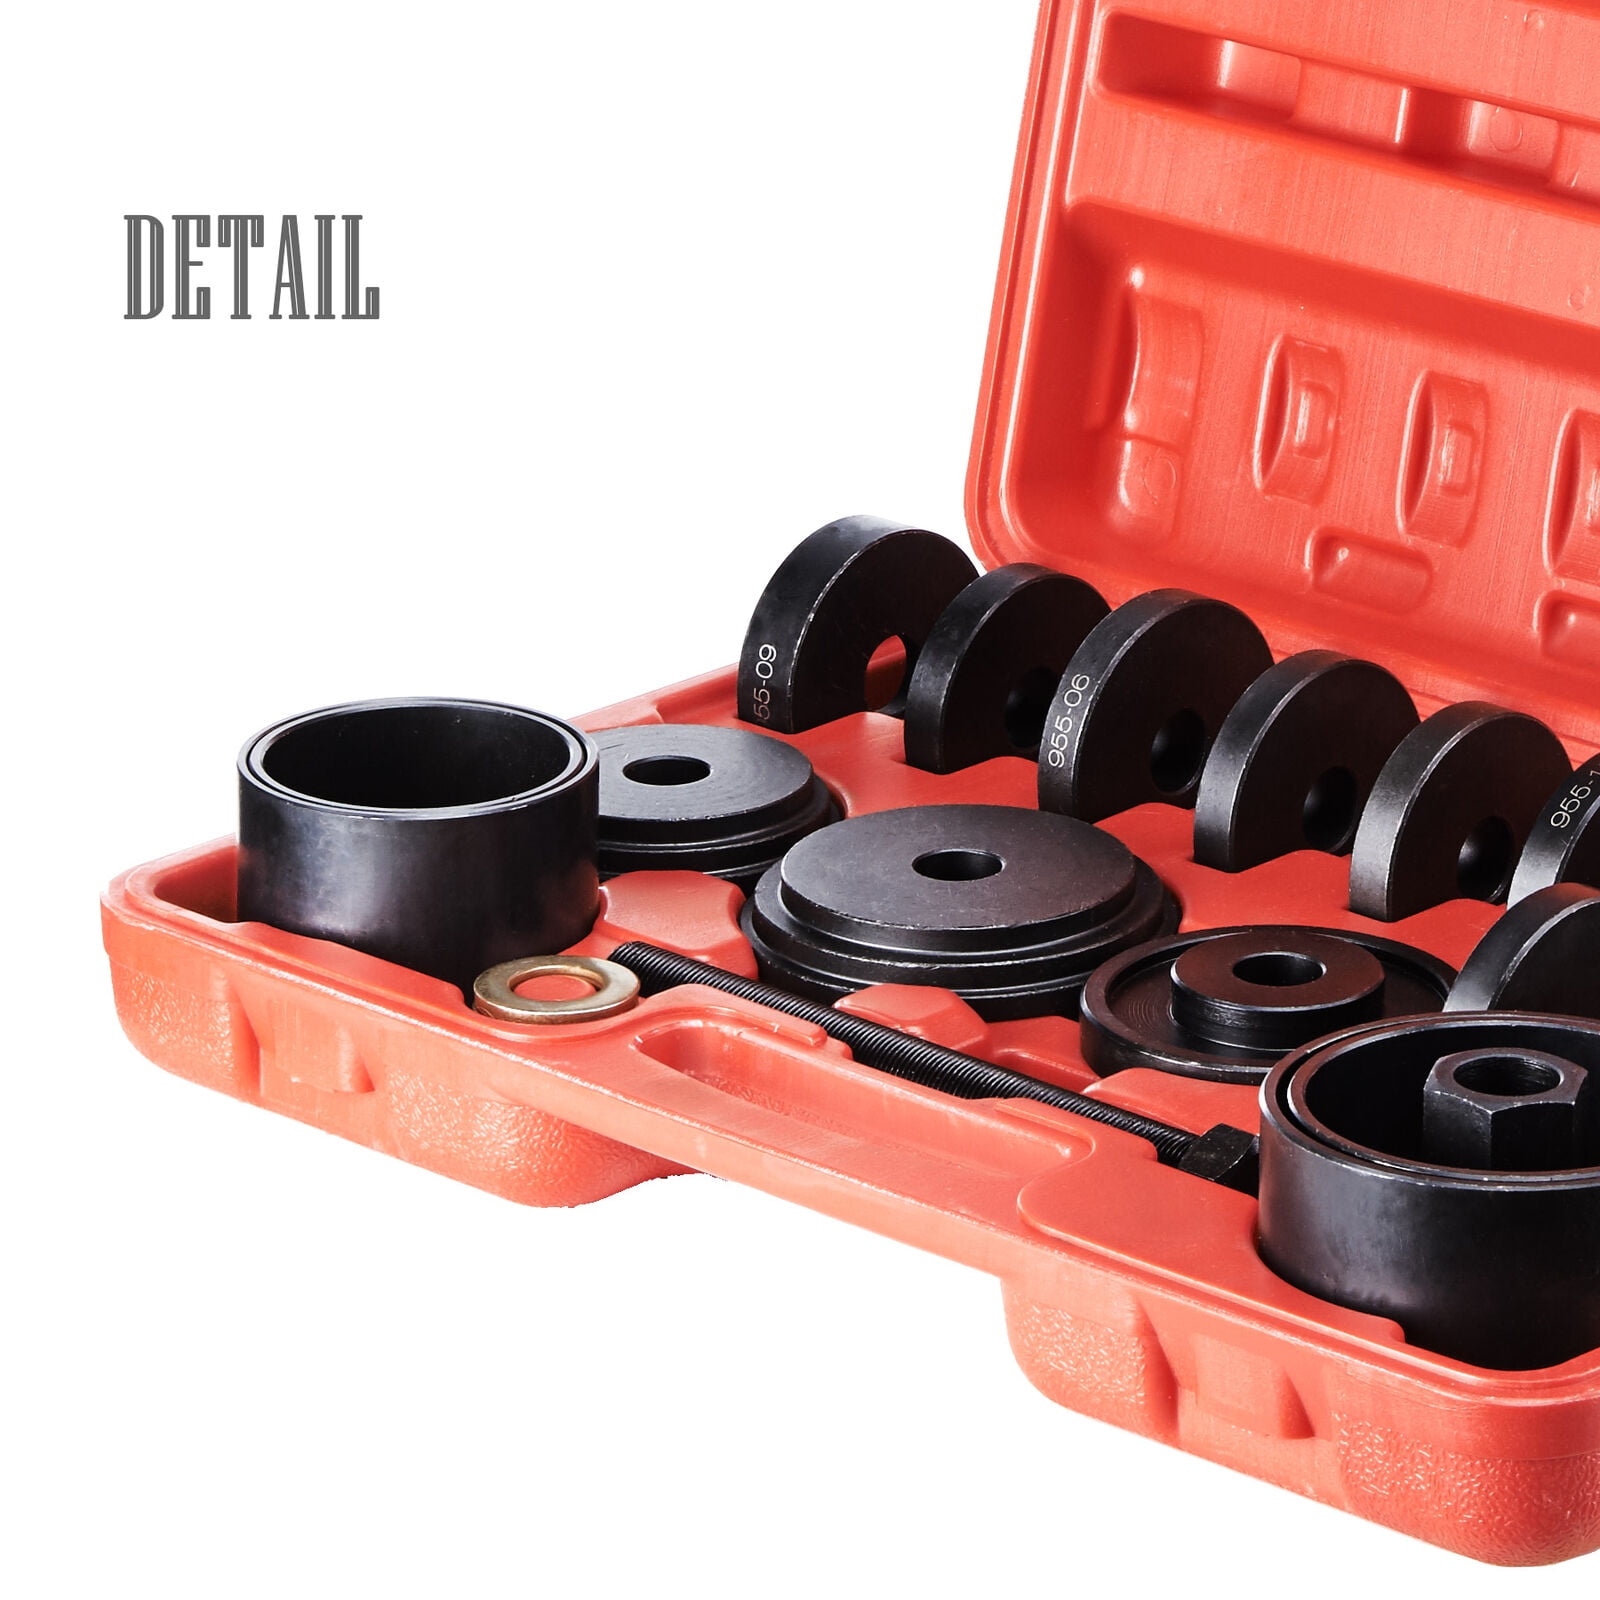 23 PCs Front Wheel Drive Bearing Removal Adapter Puller Pulley Tool Kit W/Case 